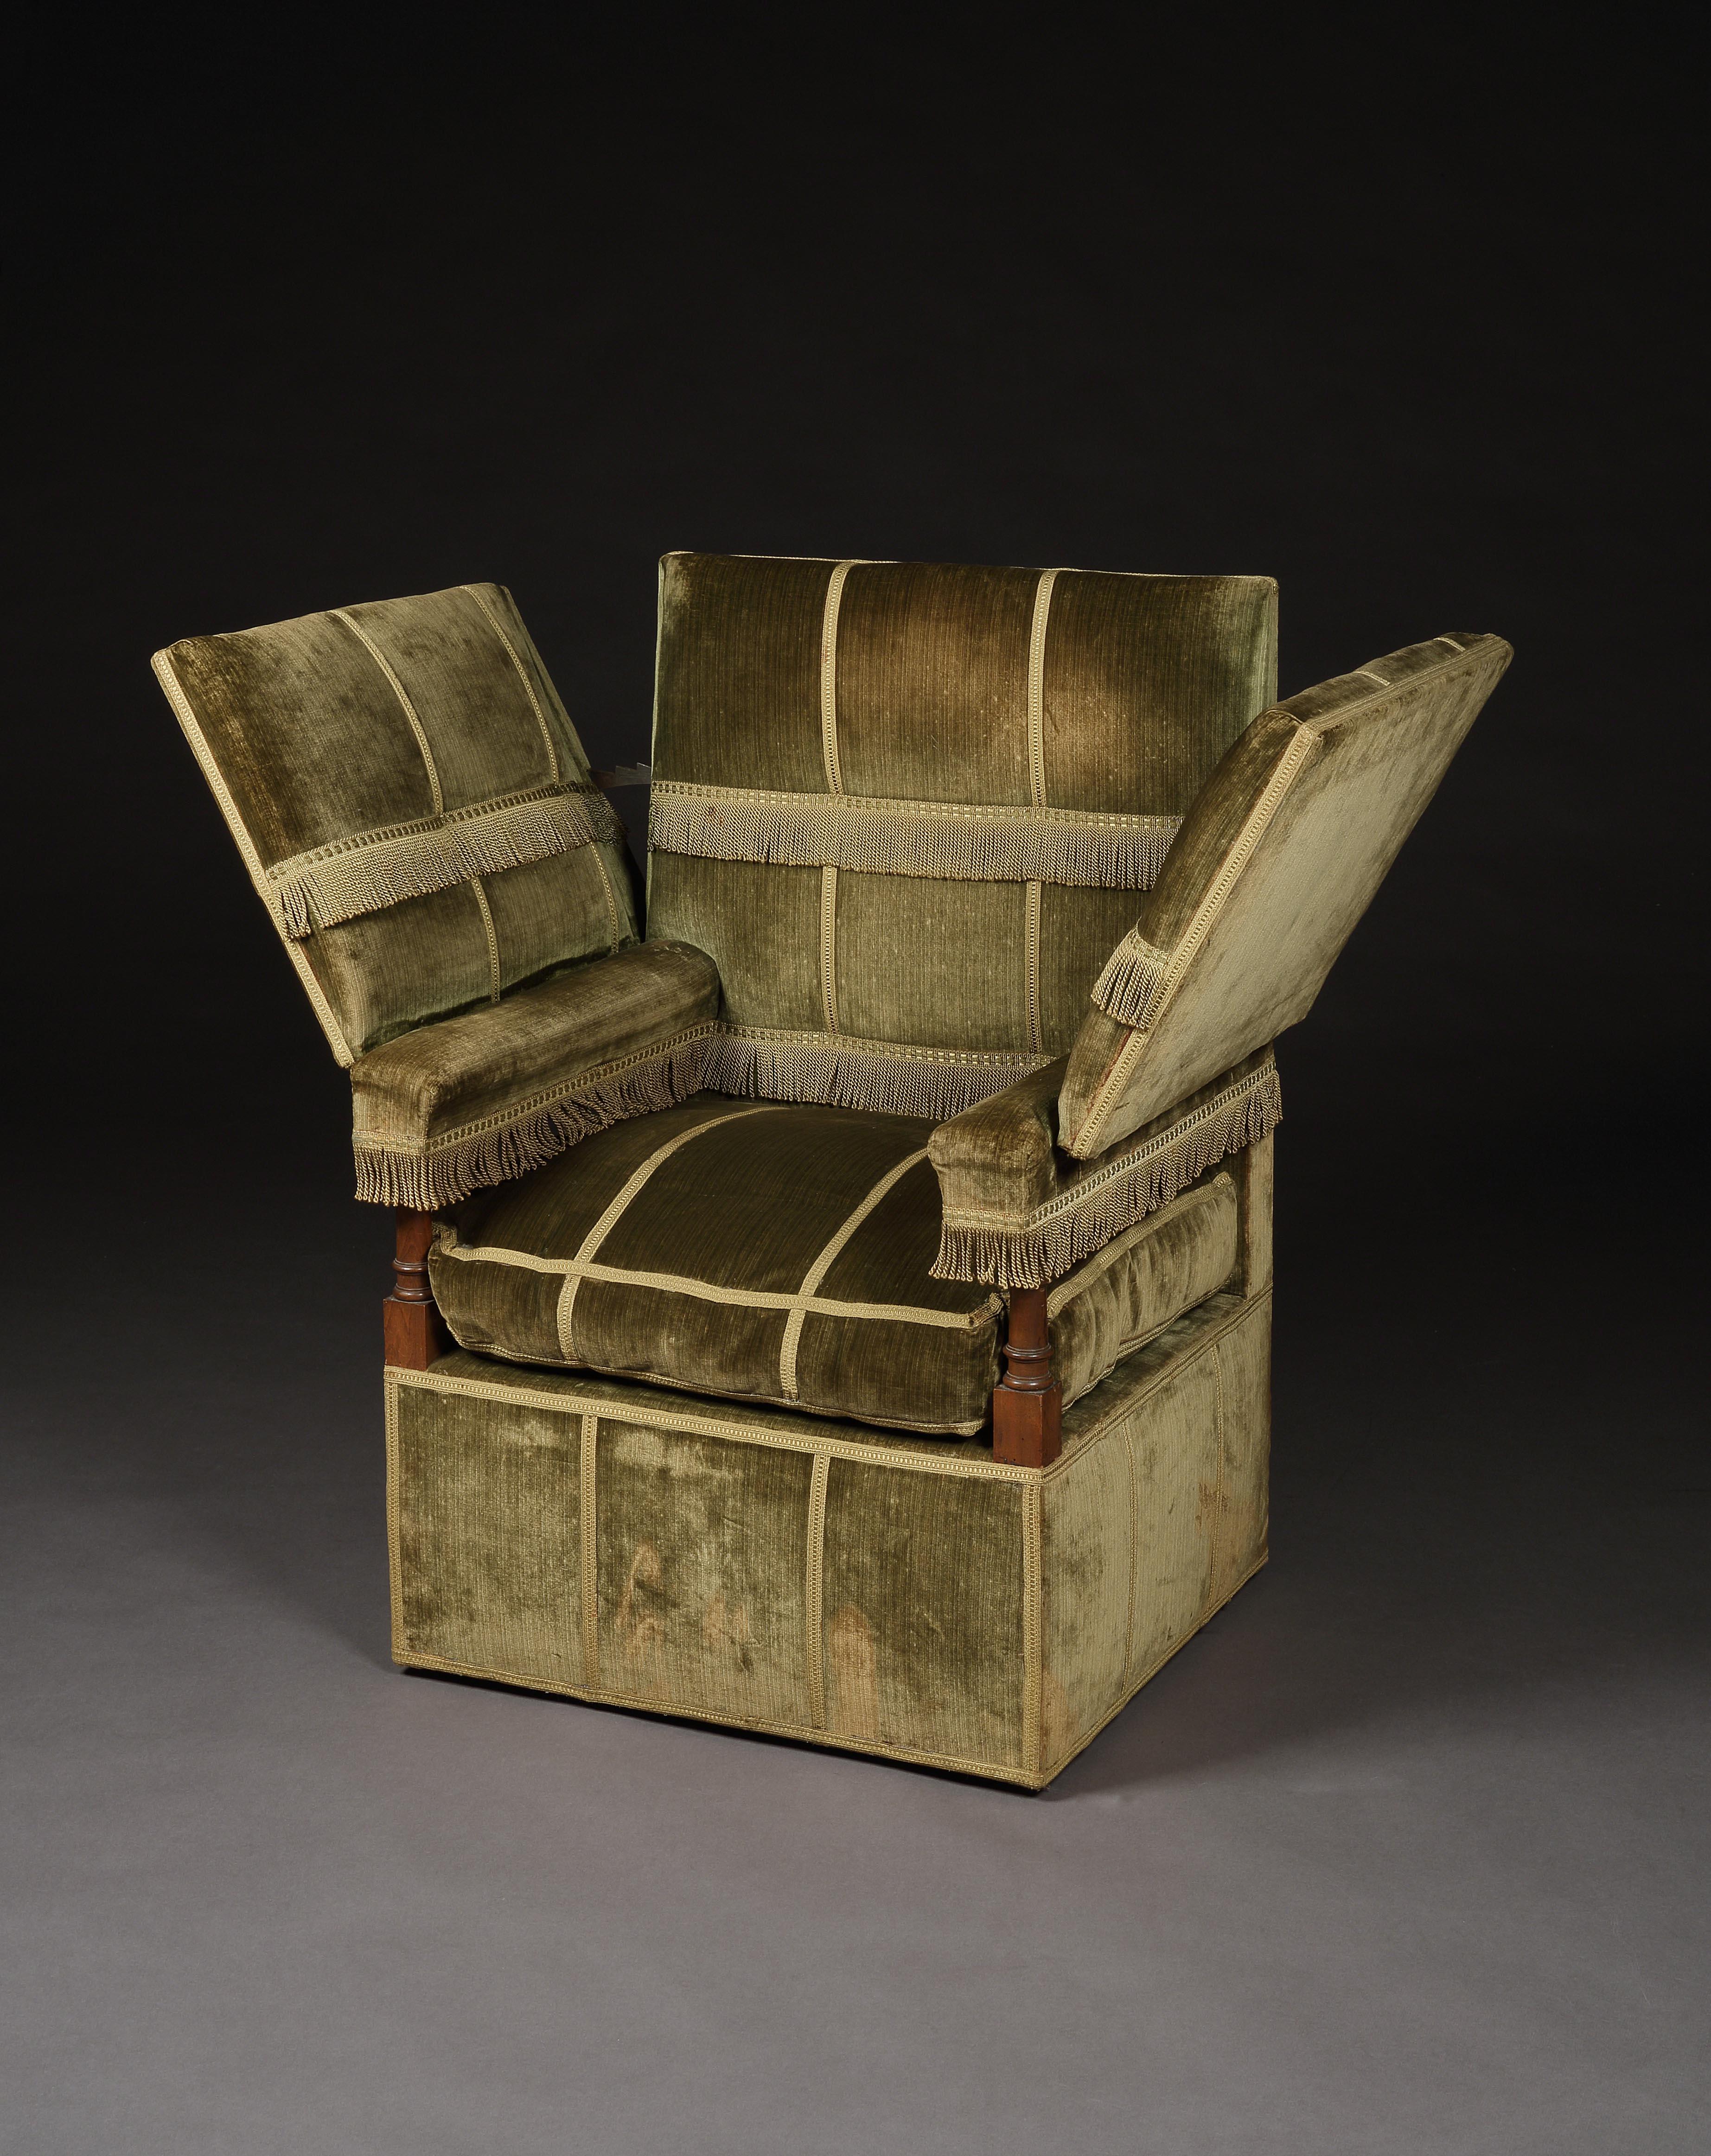 This is an early 20th century interpretation of an armchair inspired by the infamous, sumptuously, upholstered, 17th century, couch with hinged arm rests, found at Knole Park, Sevenoaks, Kent, the ancestral seat of the Sackvilles made by the most